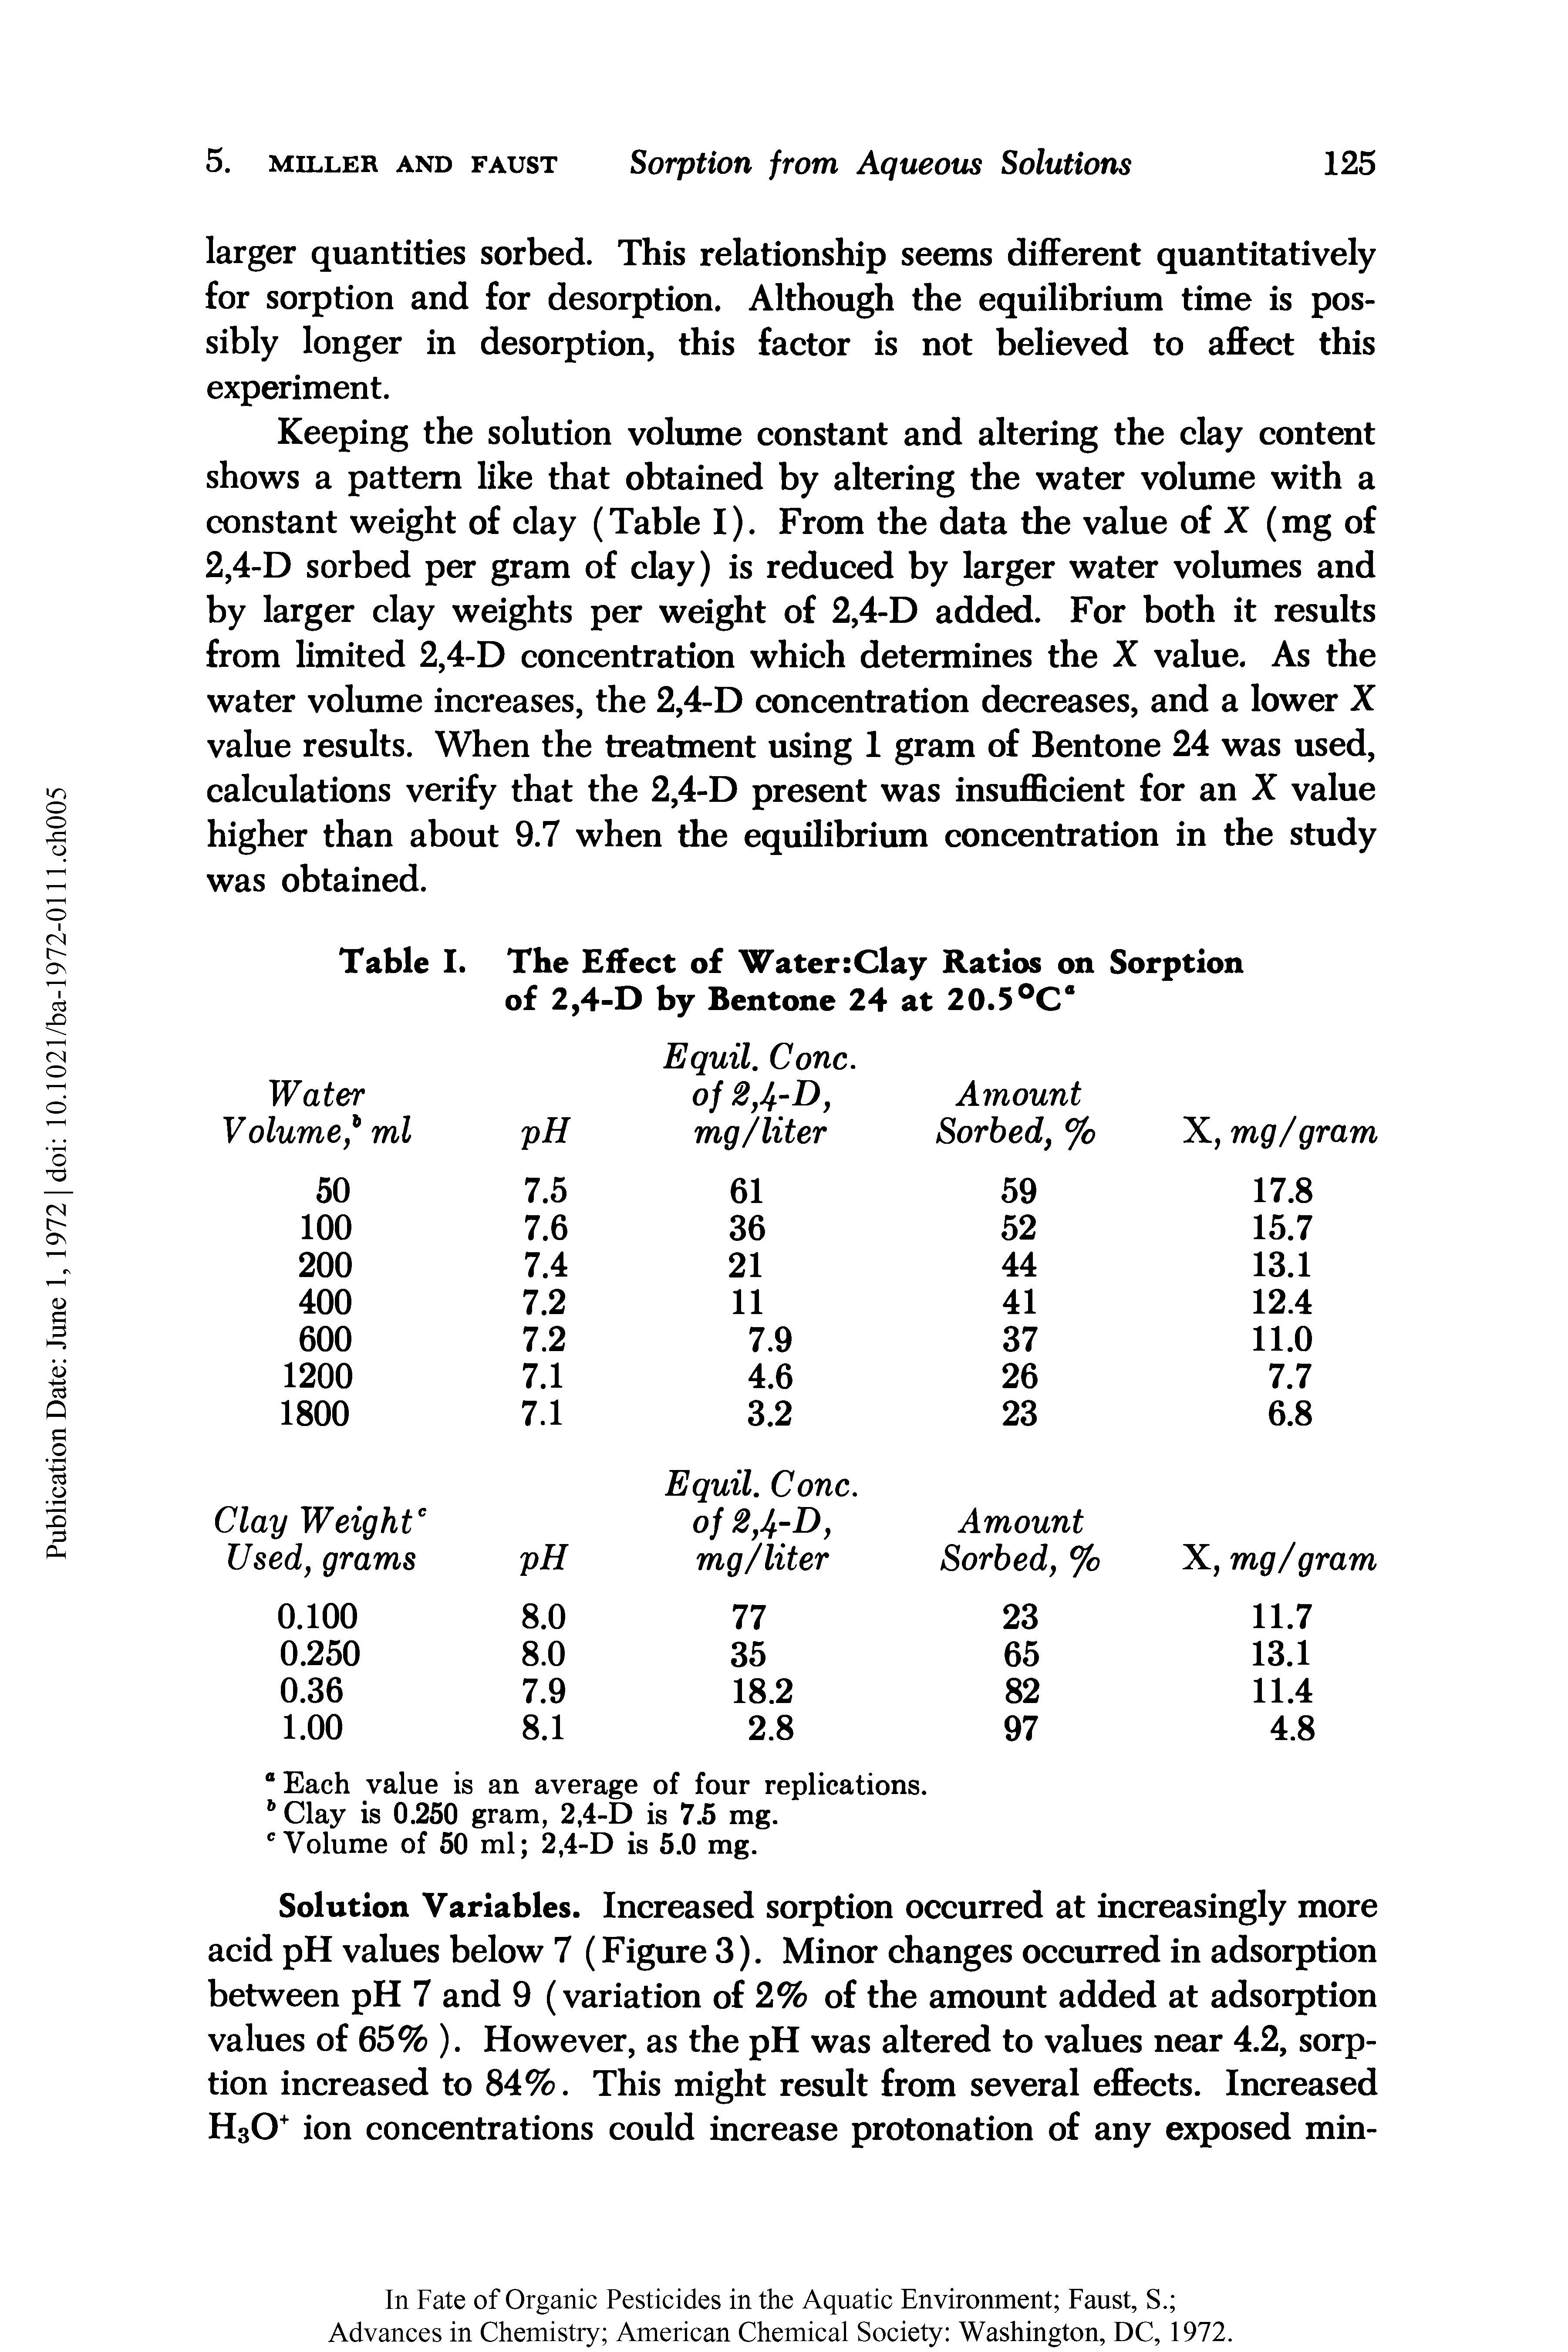 Table I. The Effect of Water Clay Ratios on Sorption of 2,4-D by Bentone 24 at 20.5...